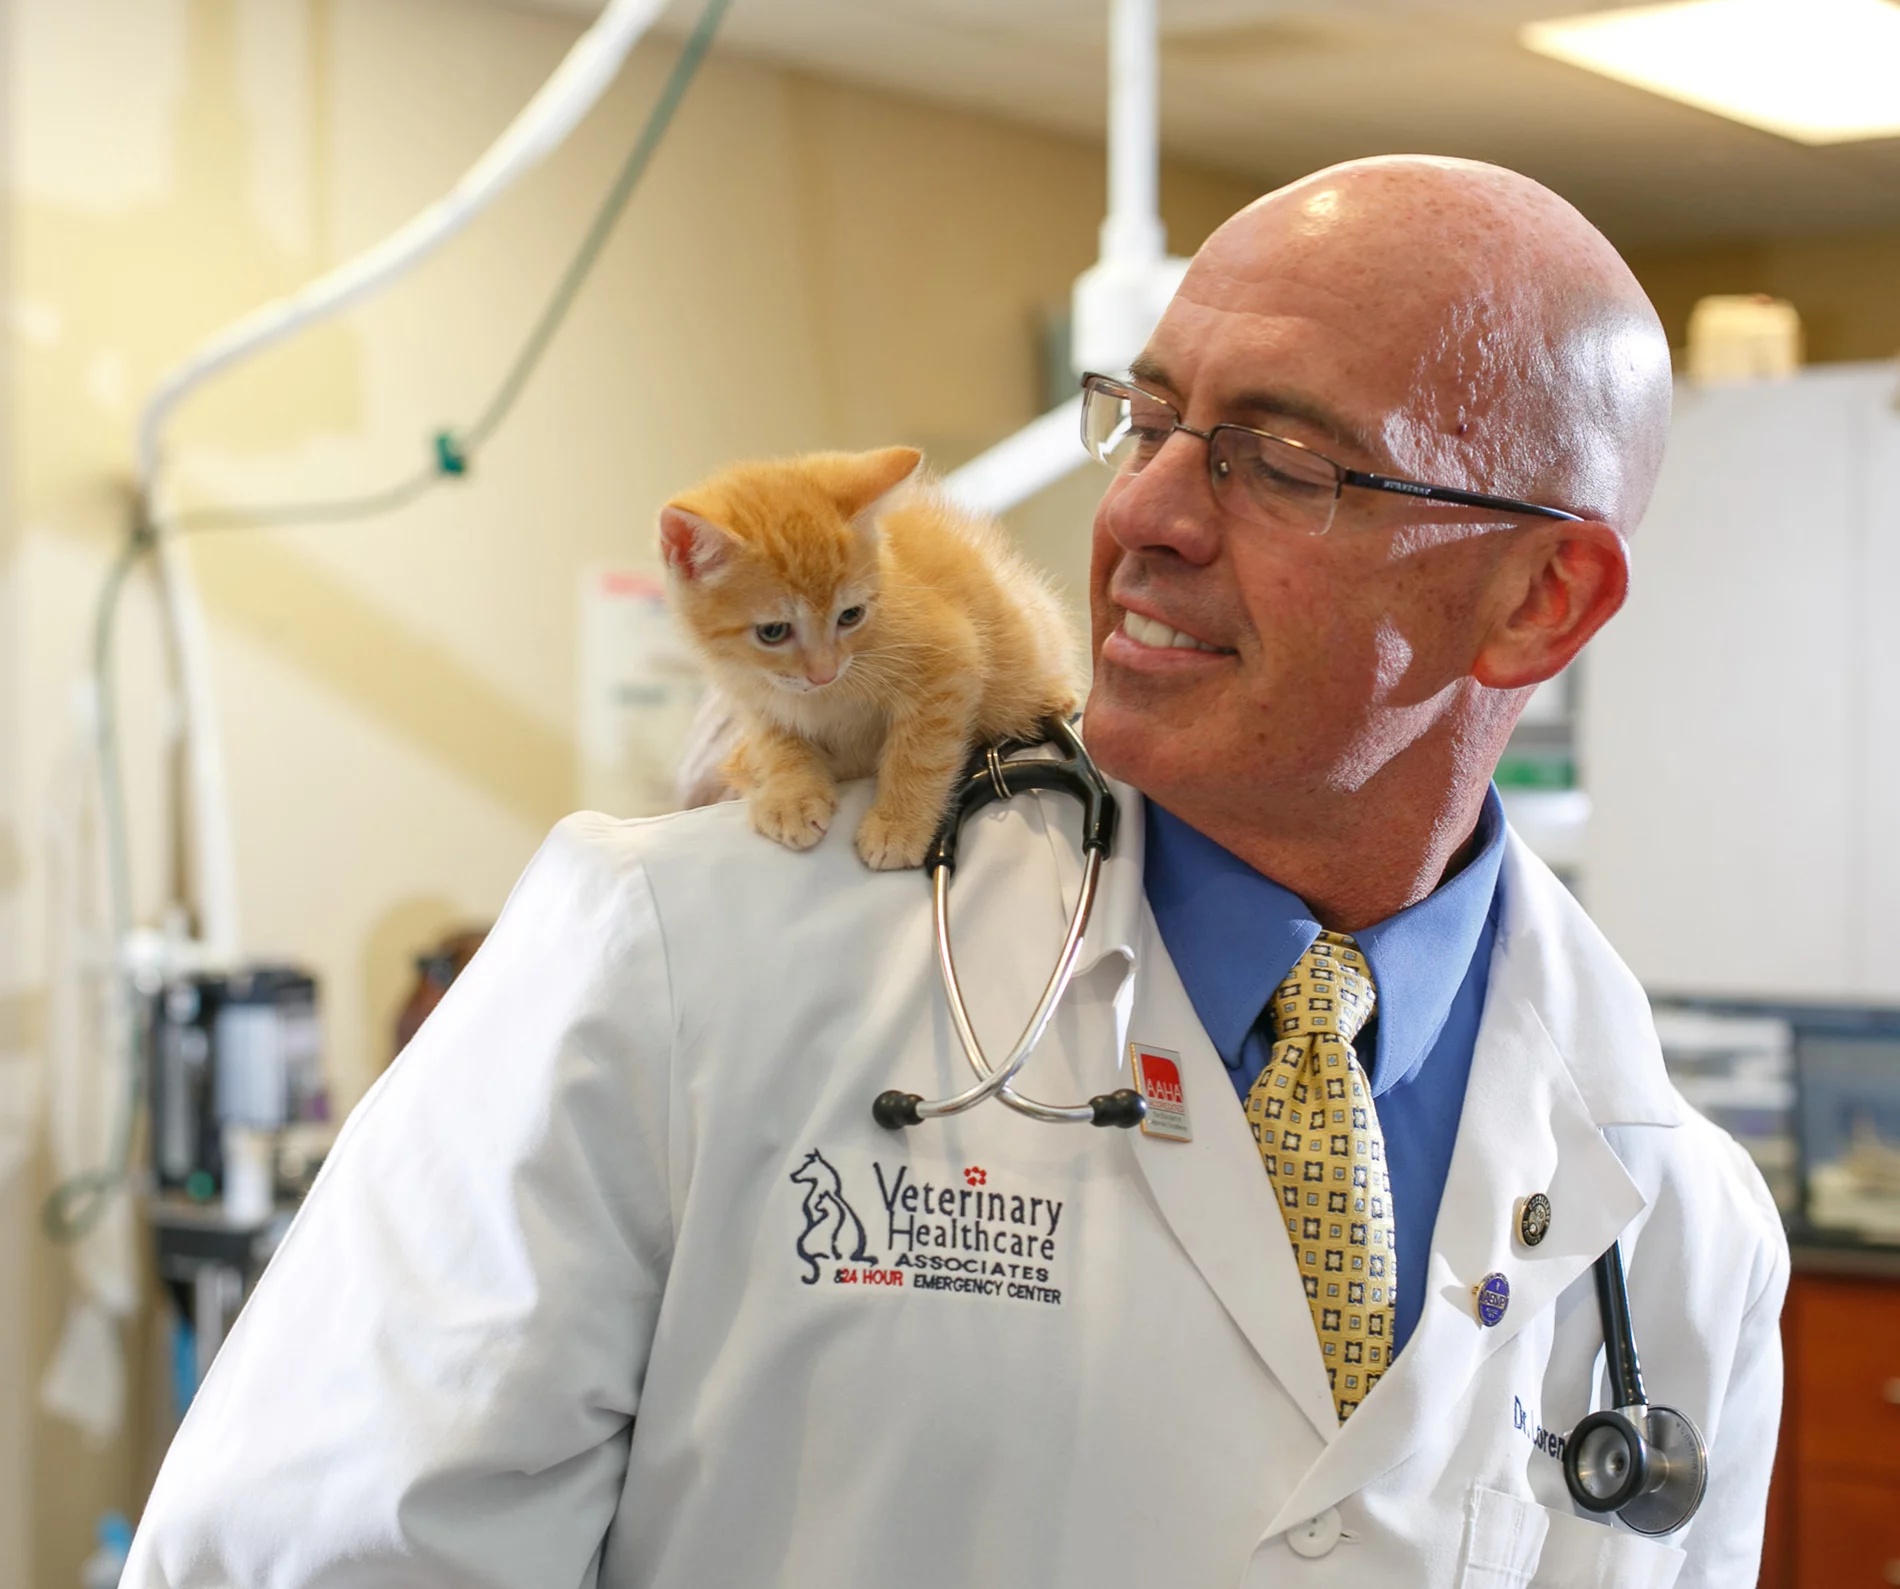 dr nations with kitten on his shoulder